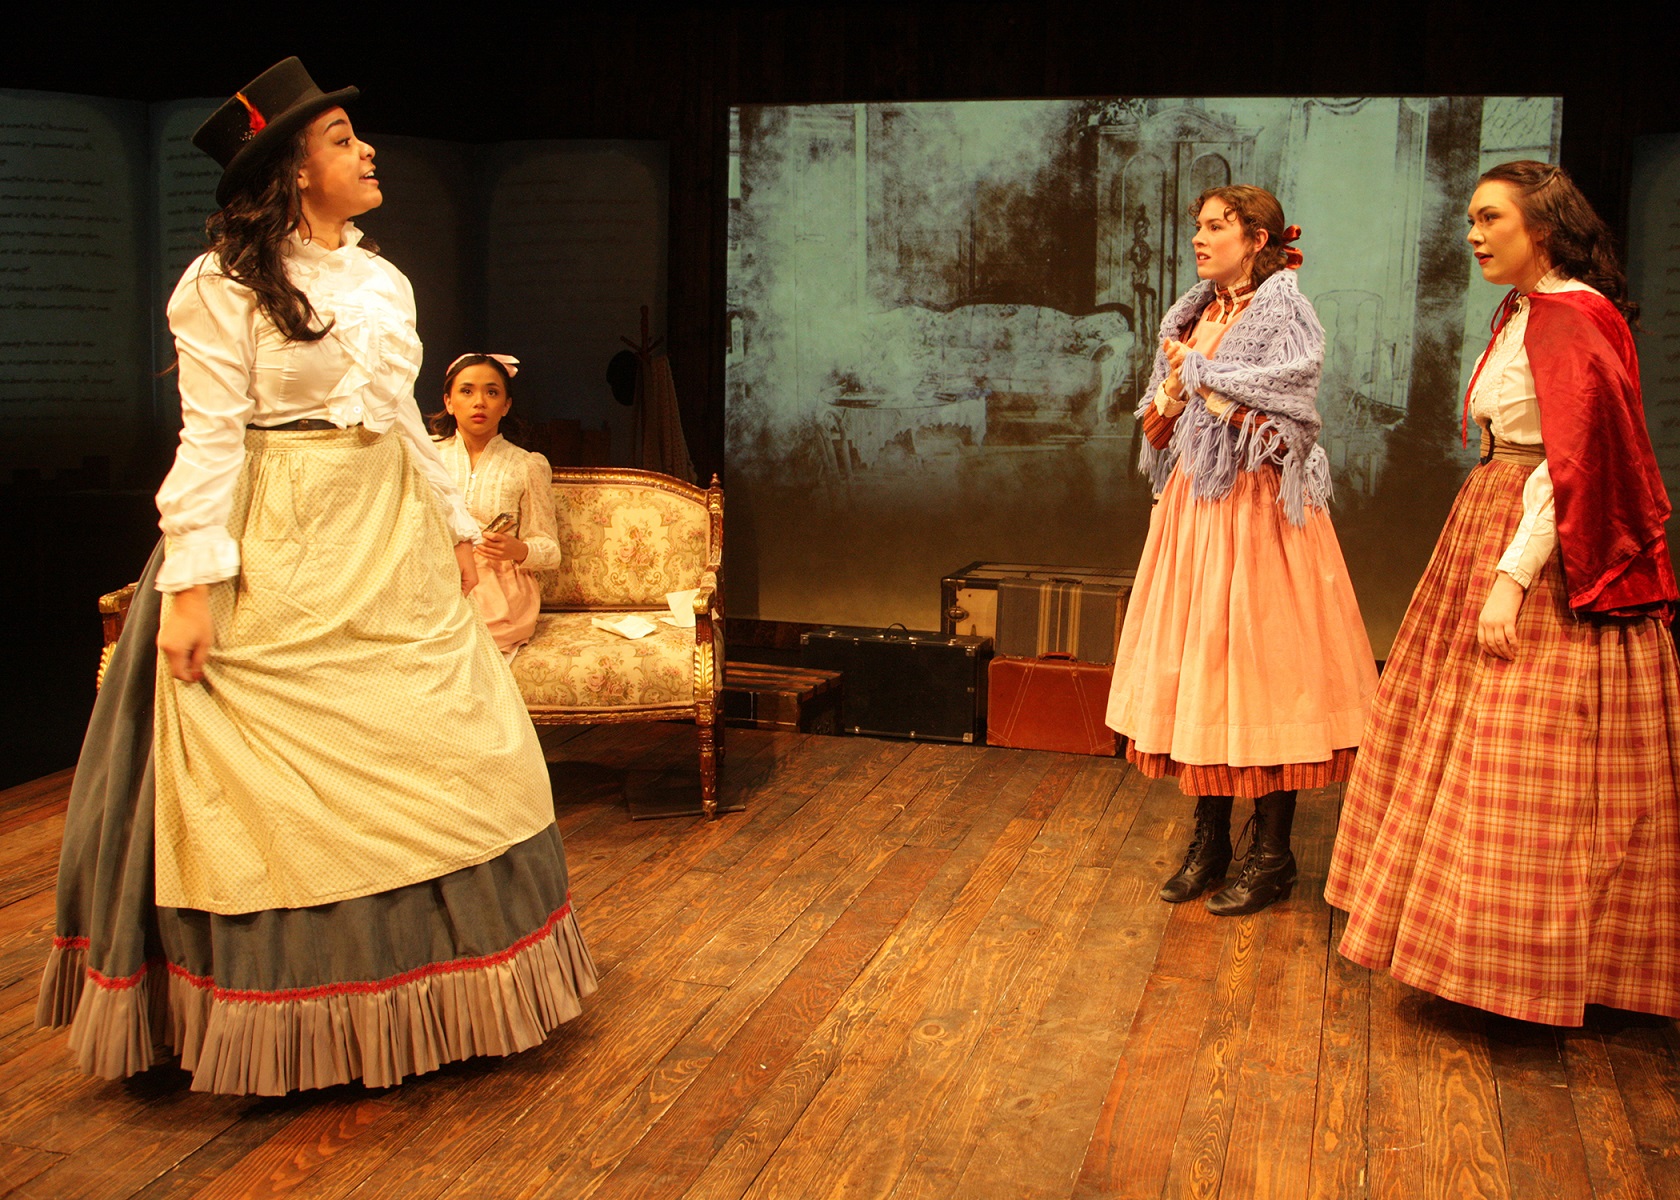 Katherine Chatman as Meg March, Camie Del Rosario as Amy March, Emily Abeles as Beth March, and Sarah Pierce as Jo March Chance Theater's production of 